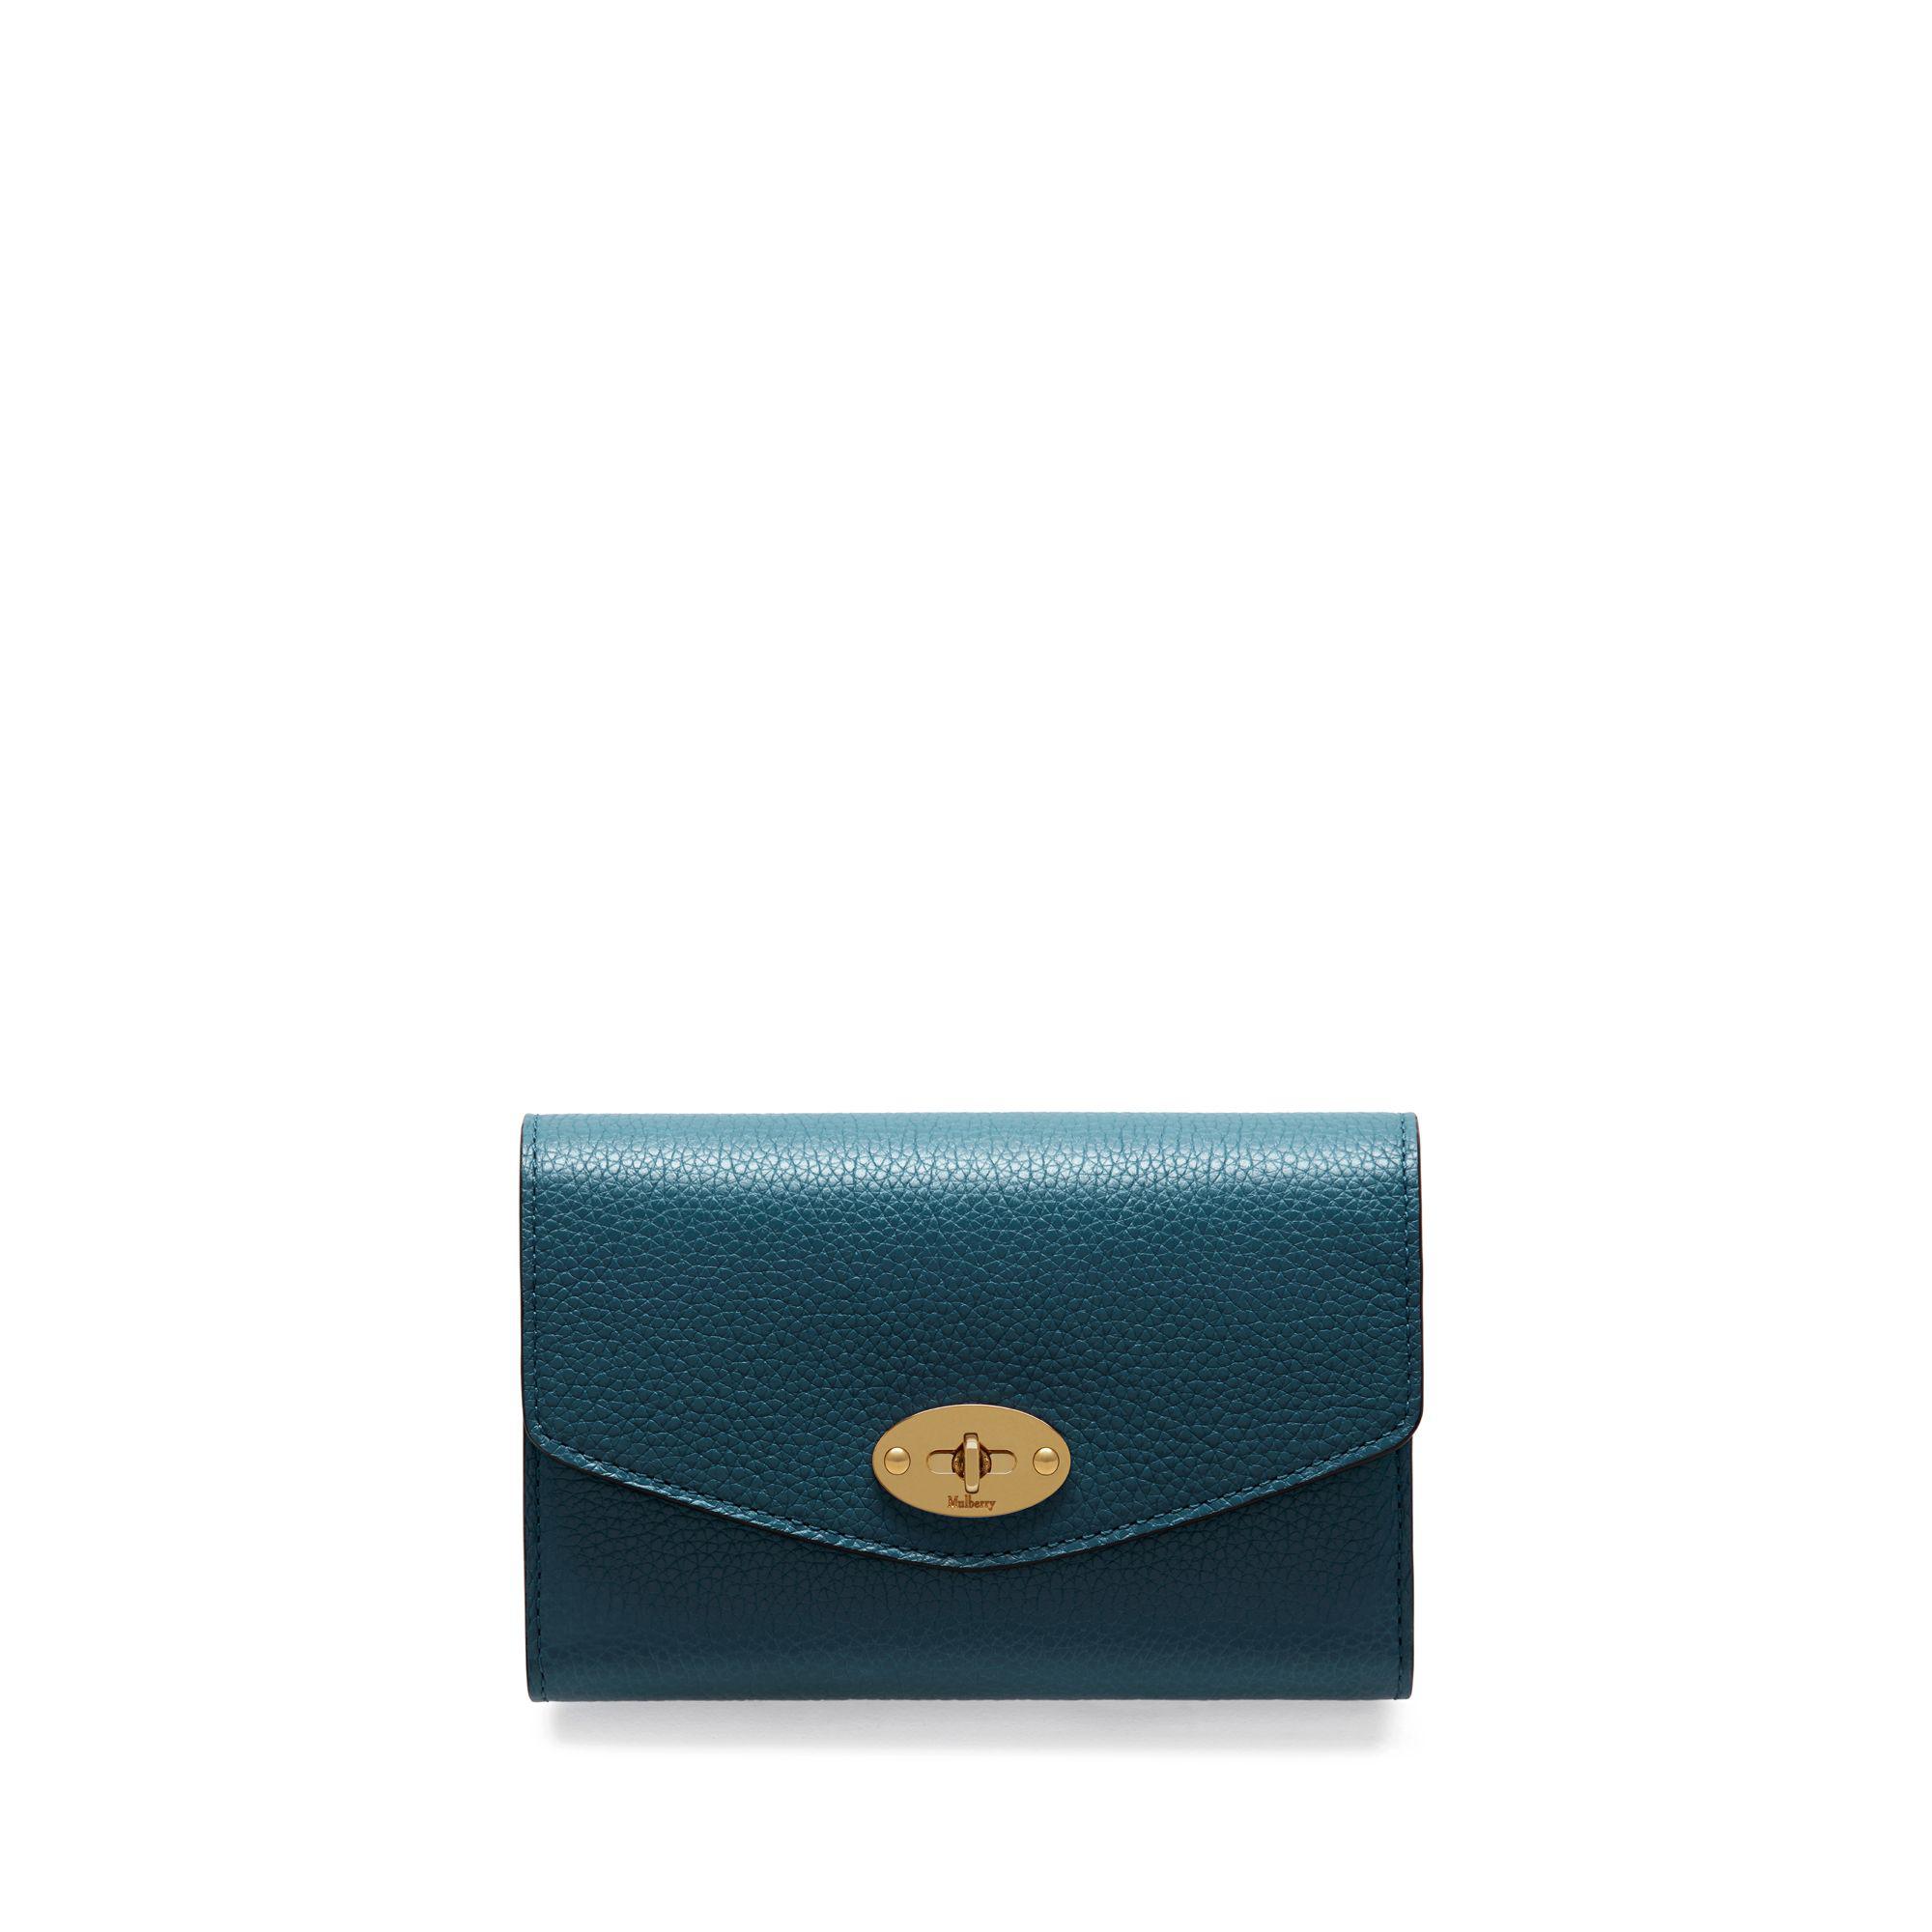 Mulberry Leather Medium Darley Wallet in Blue - Lyst